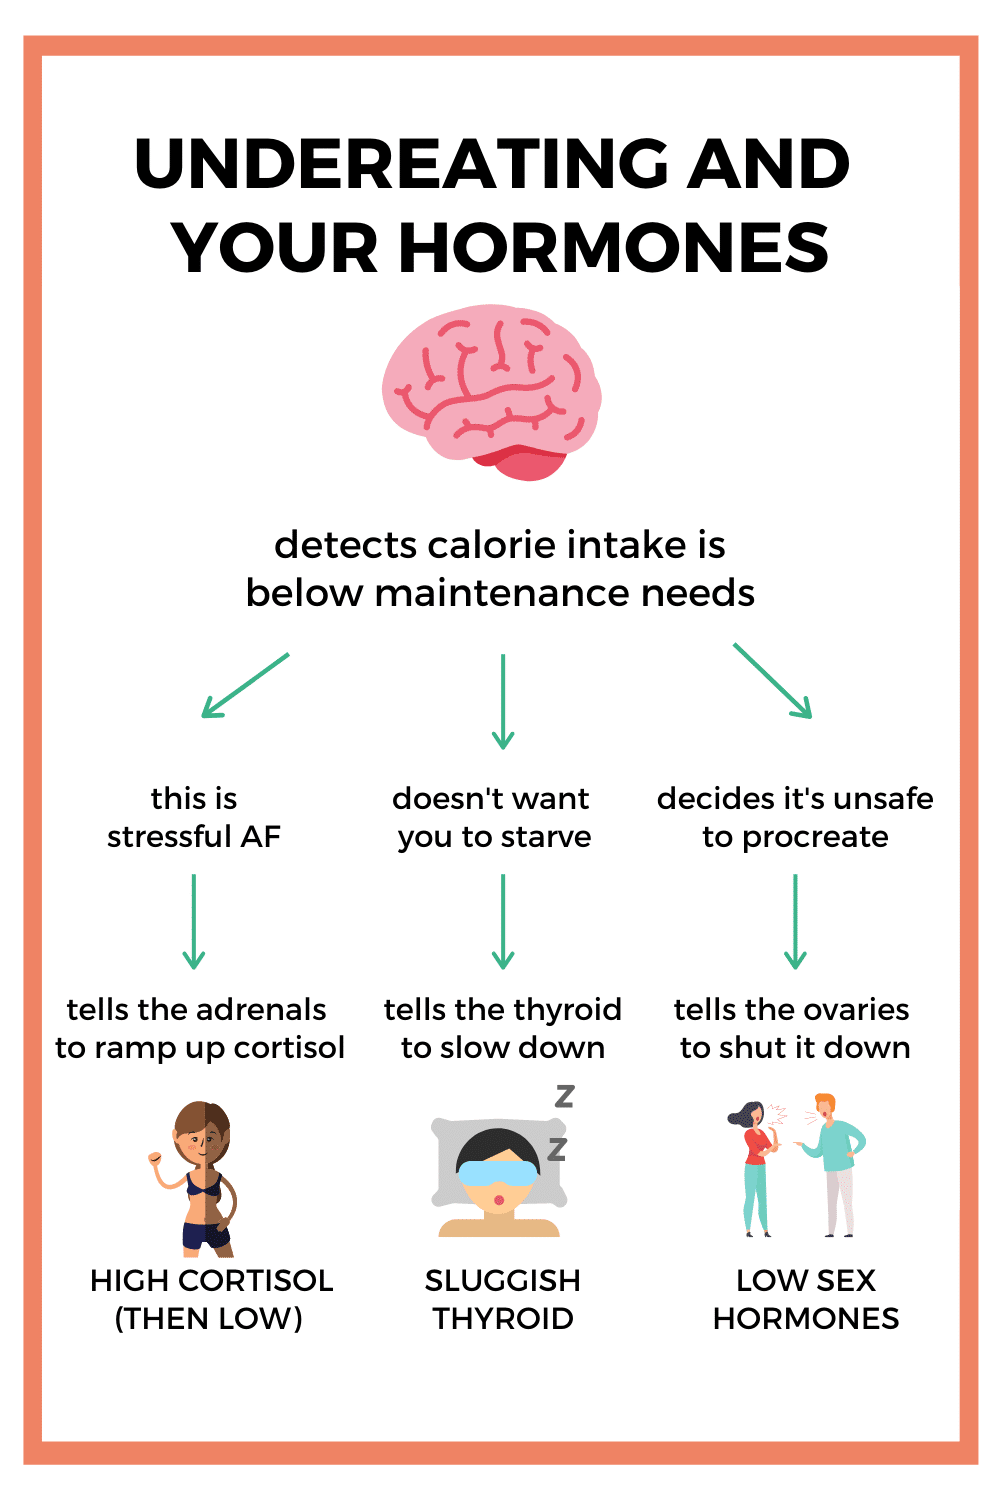 Undereating and your hormones